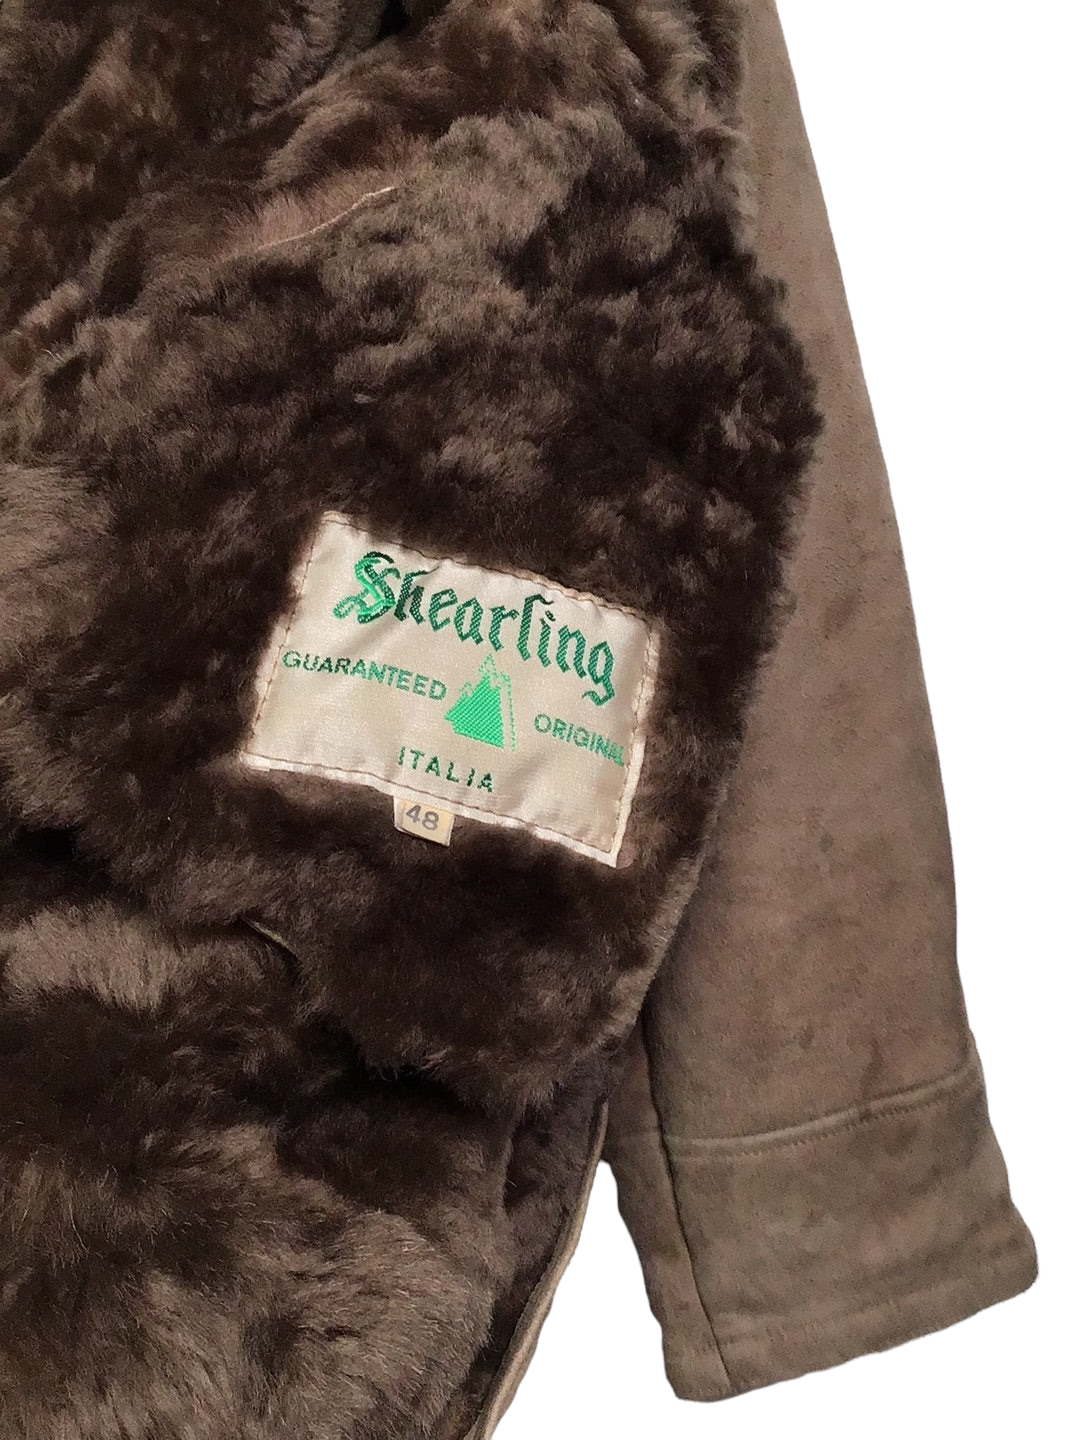 Suede And Shearling Jacket (Size M)